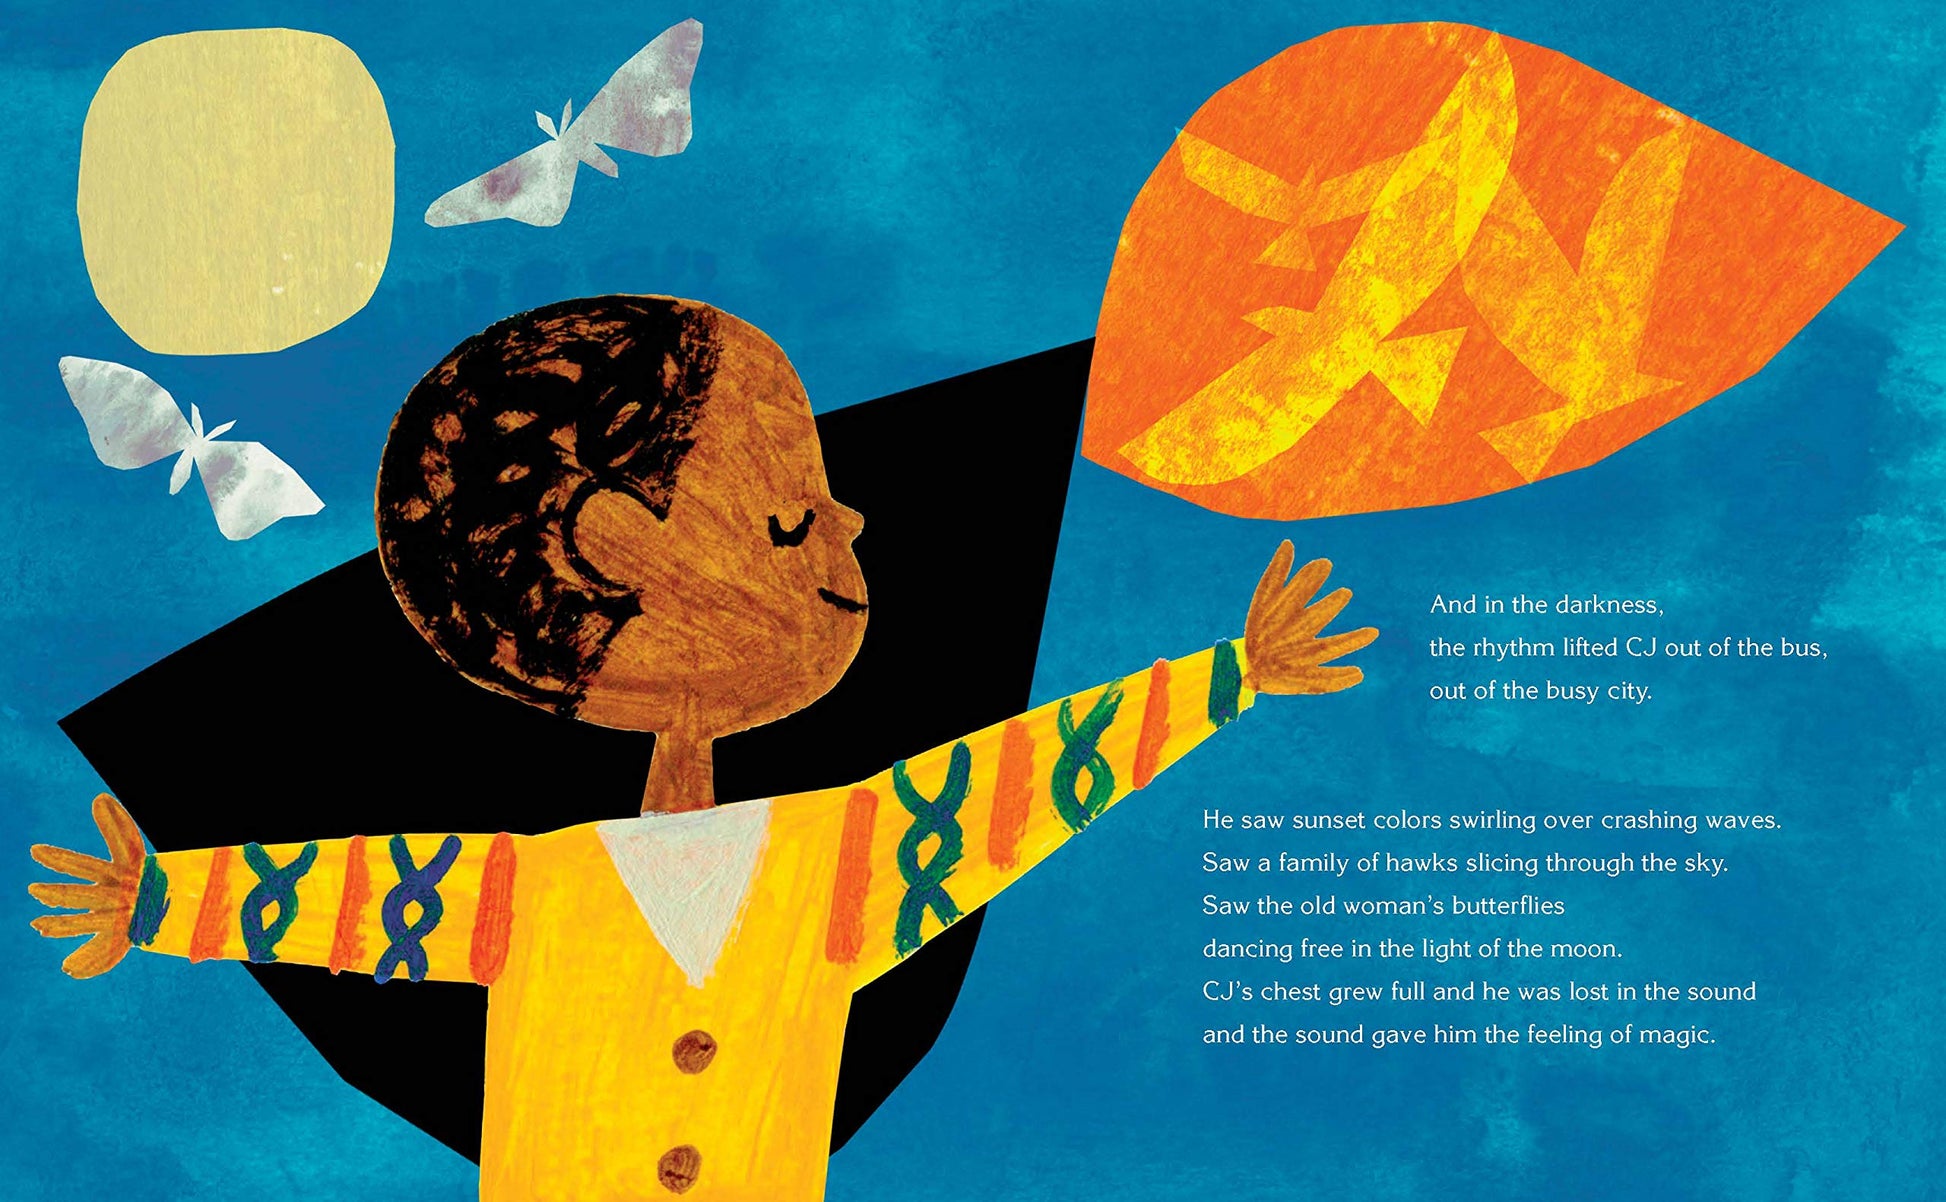 more pages with drawing of a child in front of a background of blue, black, and orange, butterflies, birds, and text